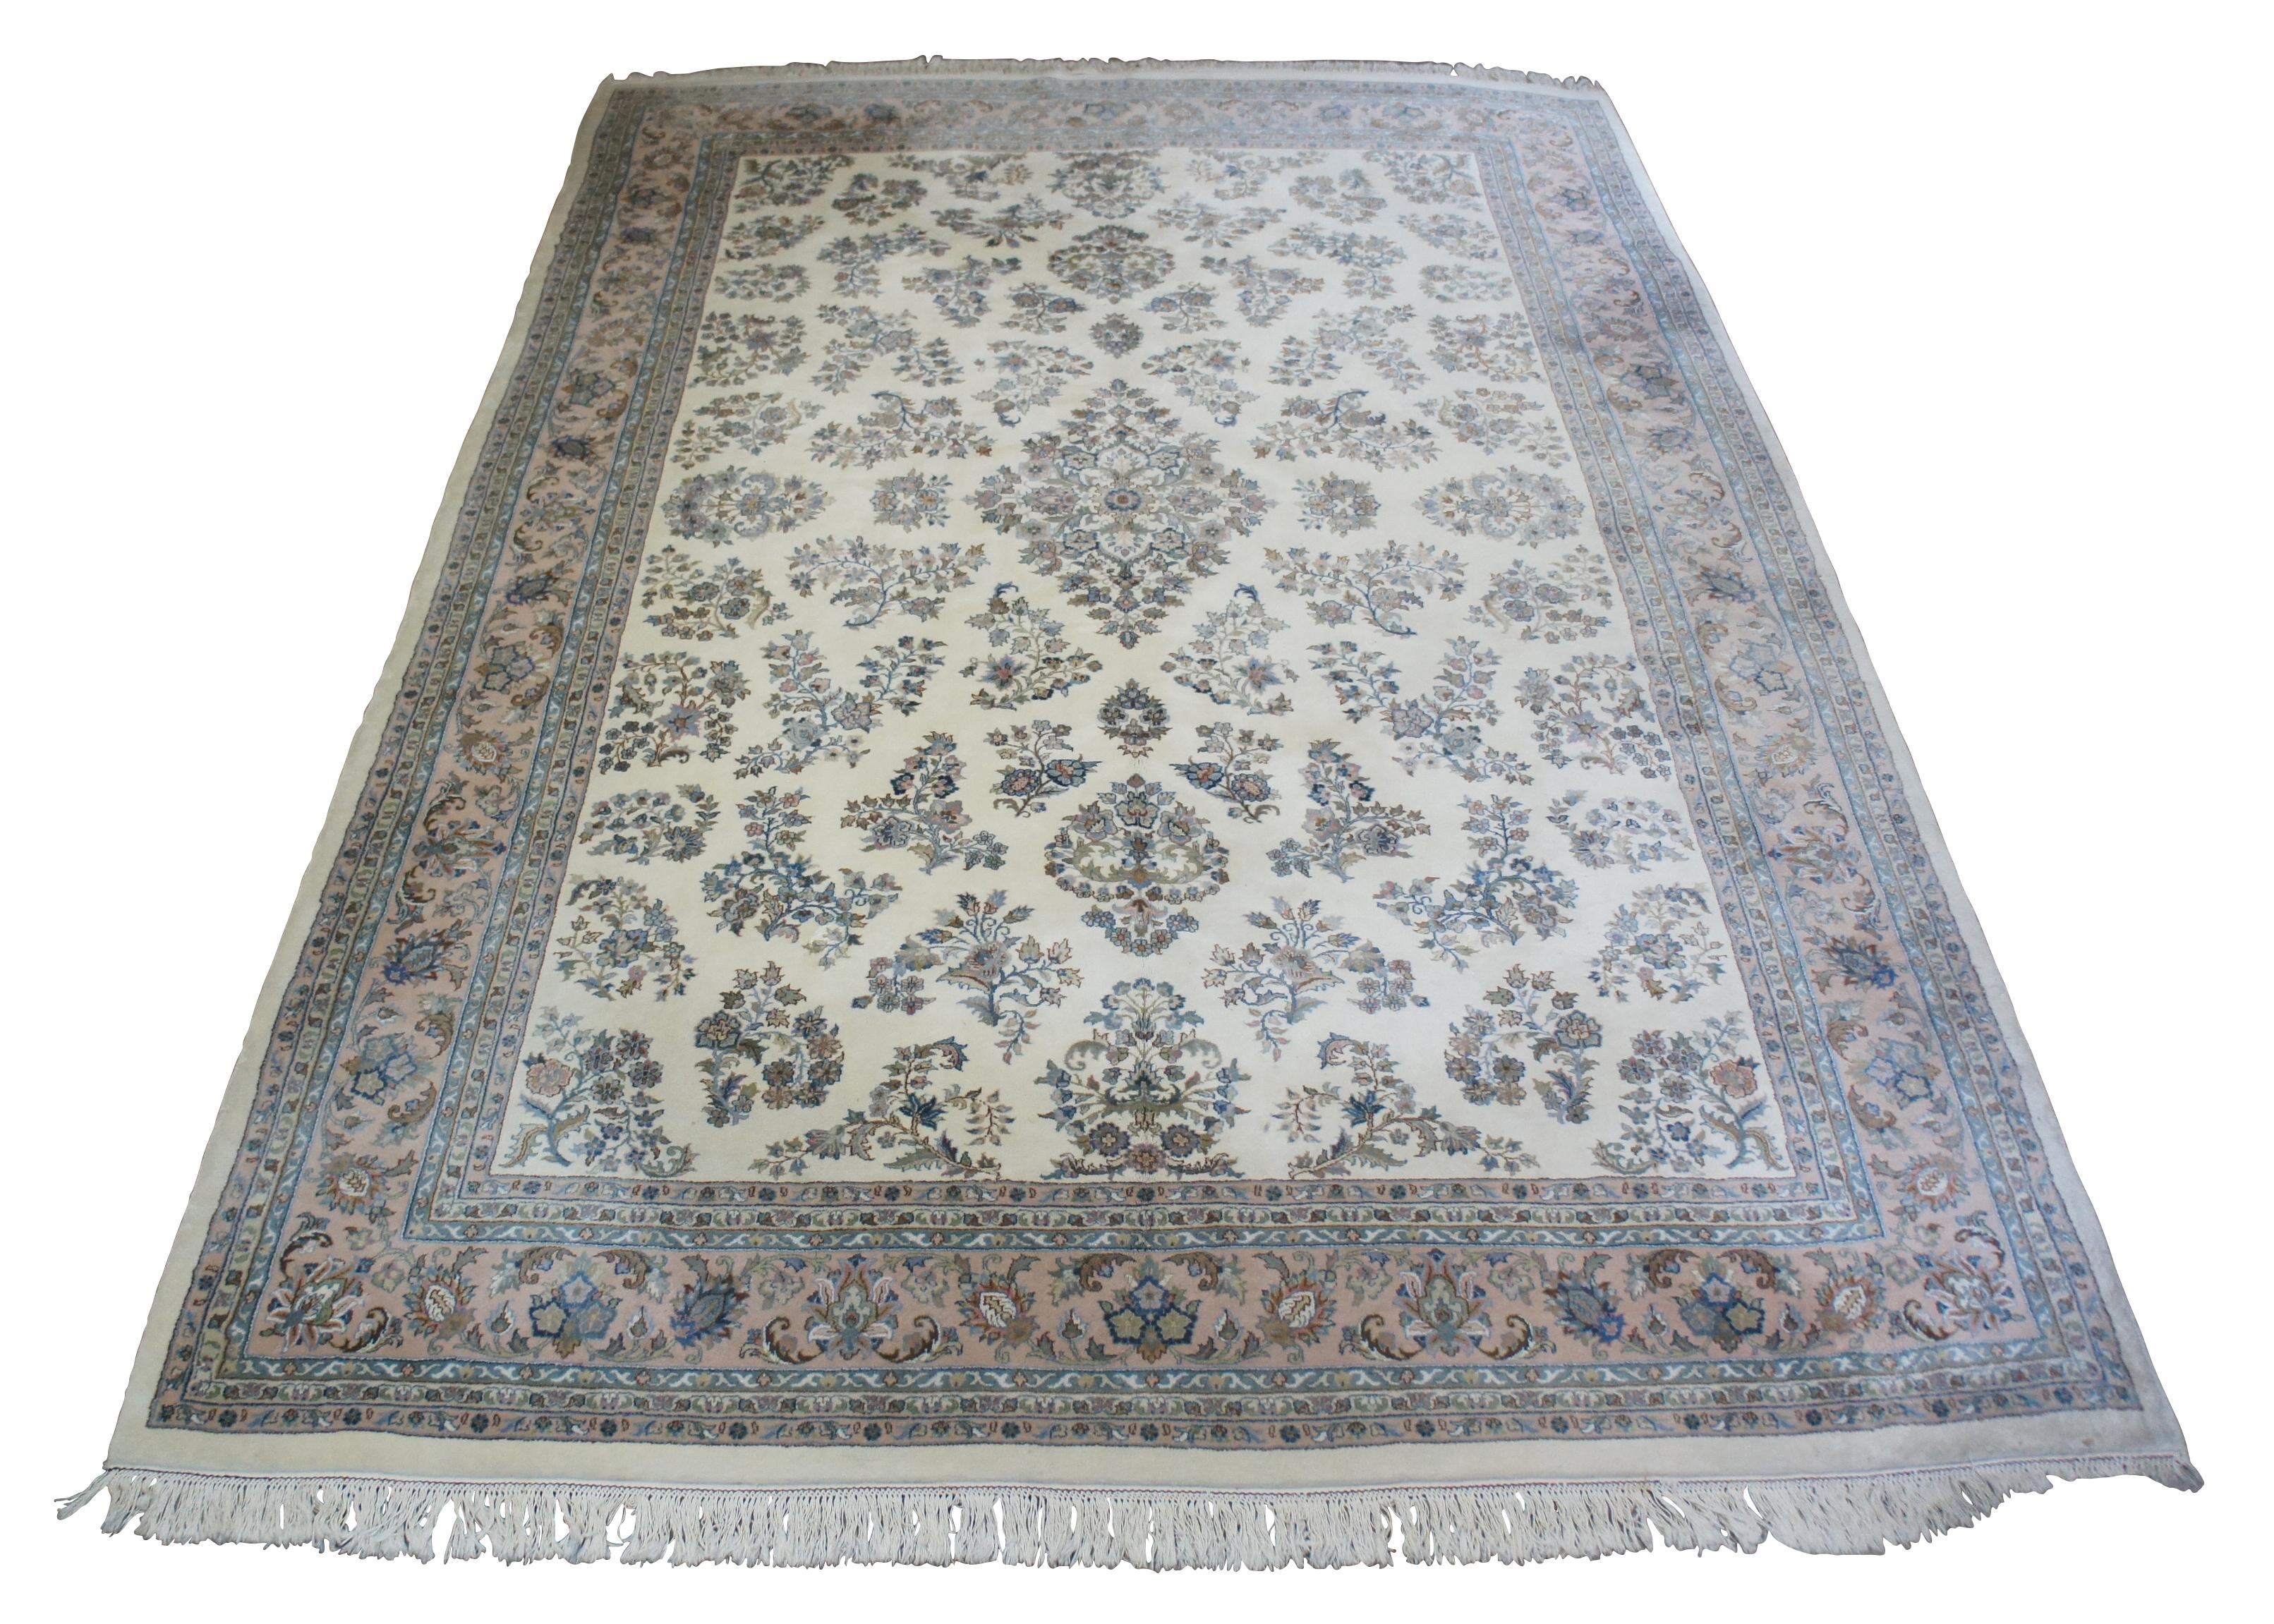 Vintage Indo area rug by Royal Rugs, circa last quarter 20th century. Handmade from 100% wood. Features a floral all over pattern with beige/creme, peaches and blues. Royal rugs has been in business since the 1950s. The company was started by a